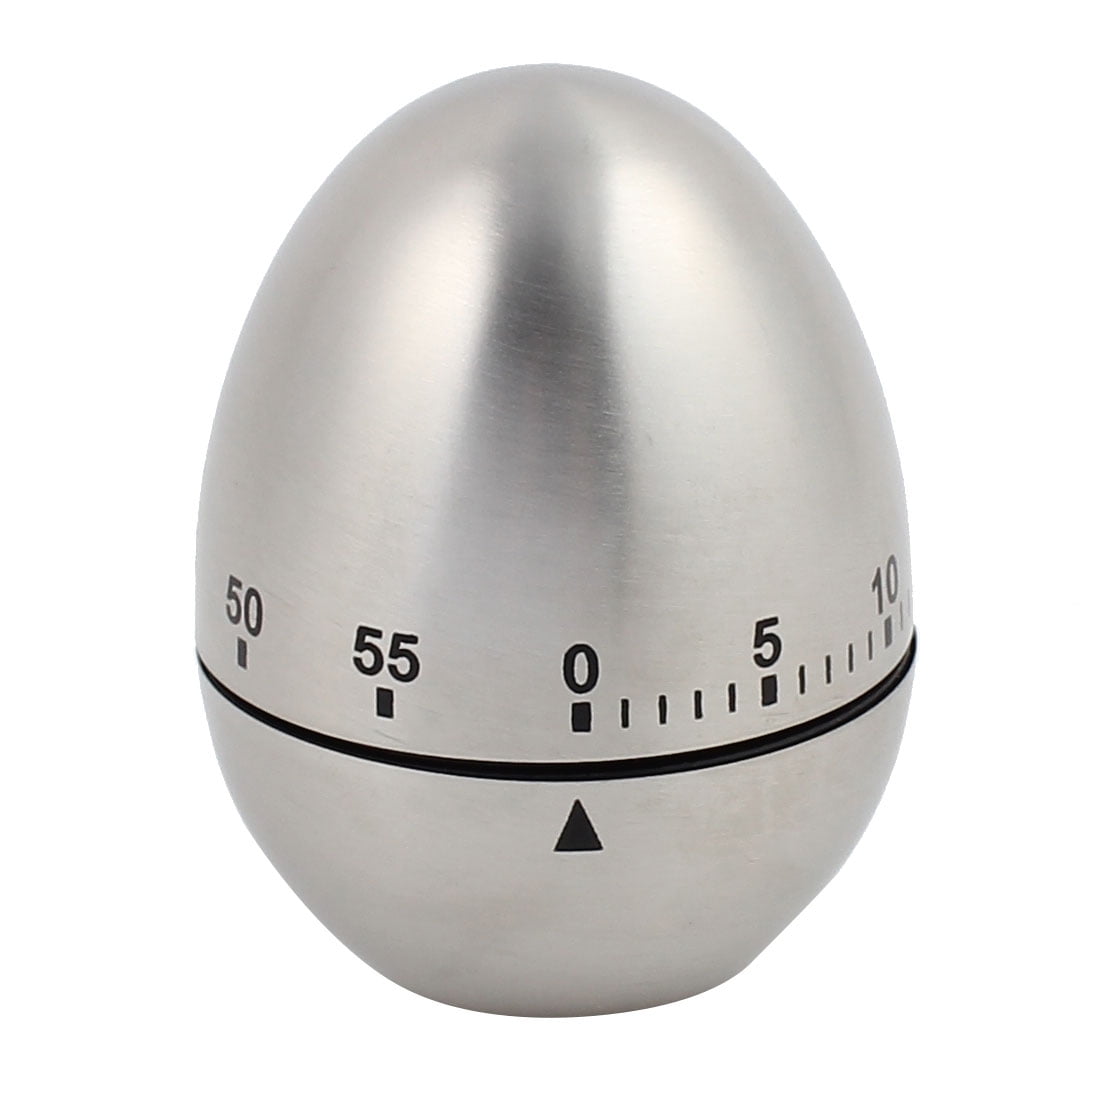 Norpro 1481 Stainless Steel Egg Timer,No 1481 Norpro 